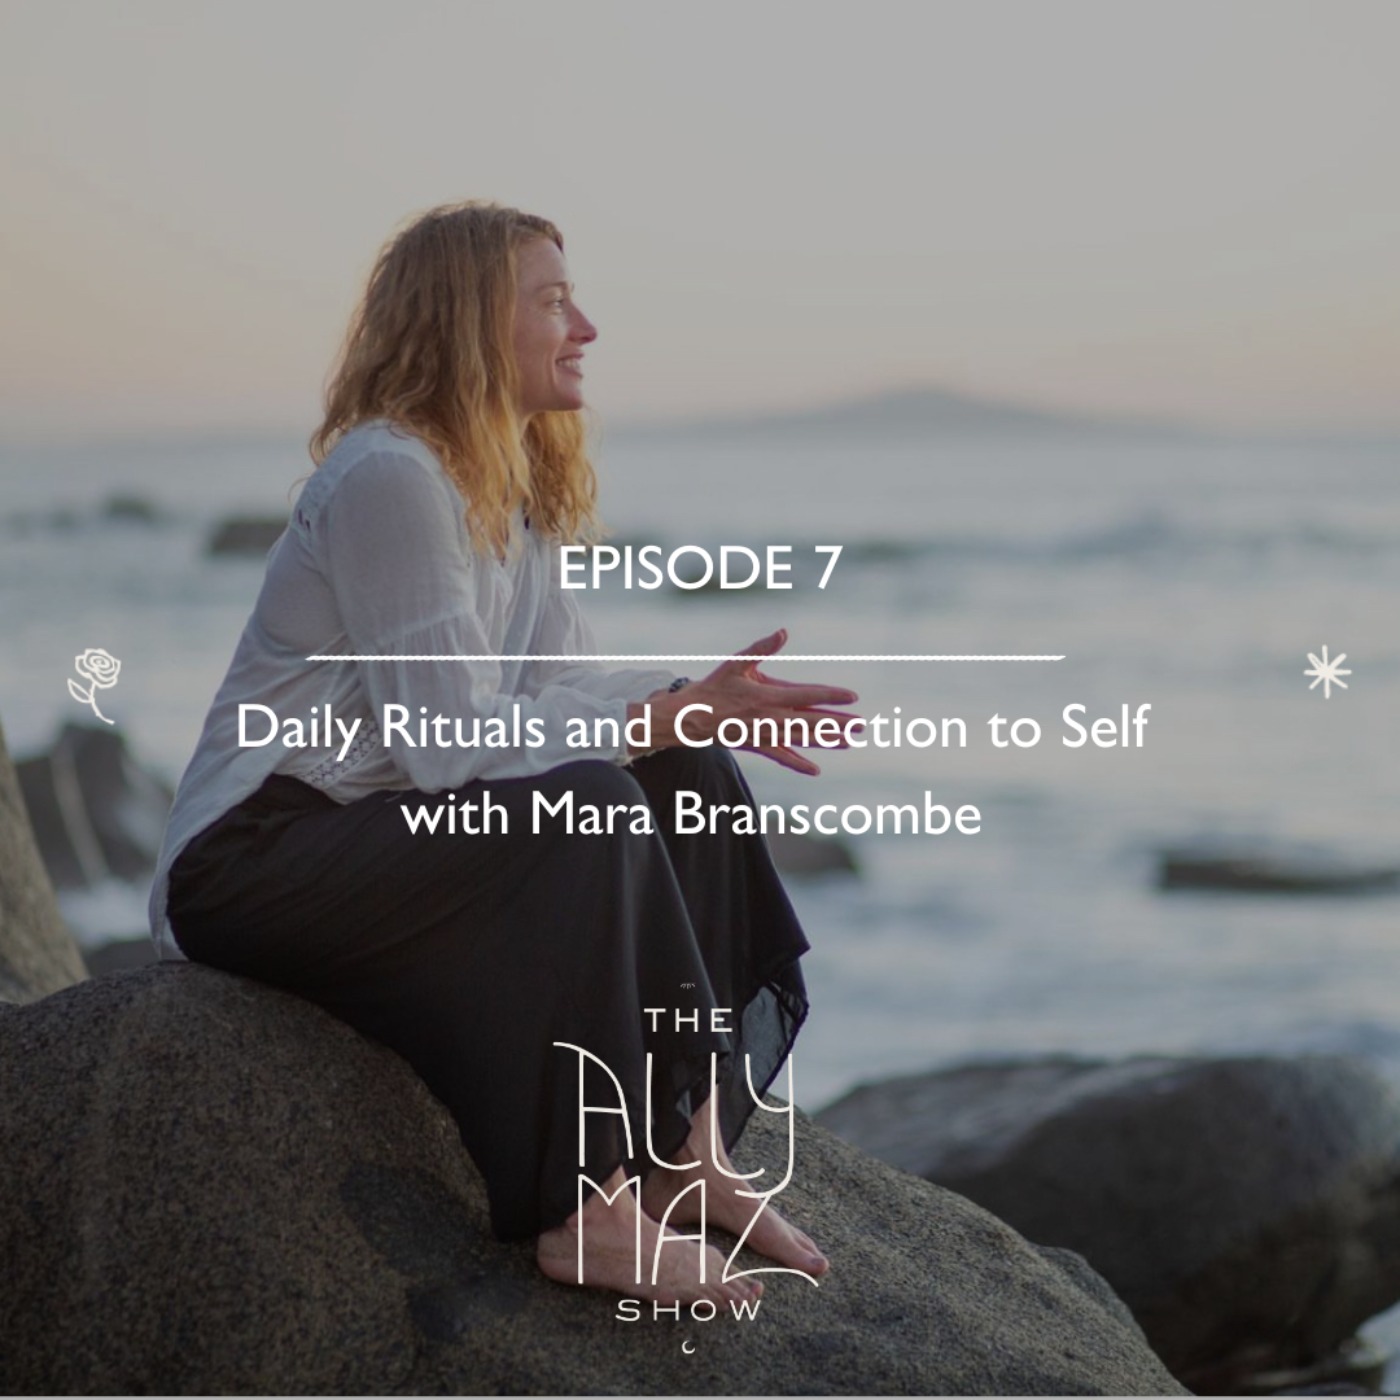 Daily Rituals and Connection to Self with Mara Branscombe